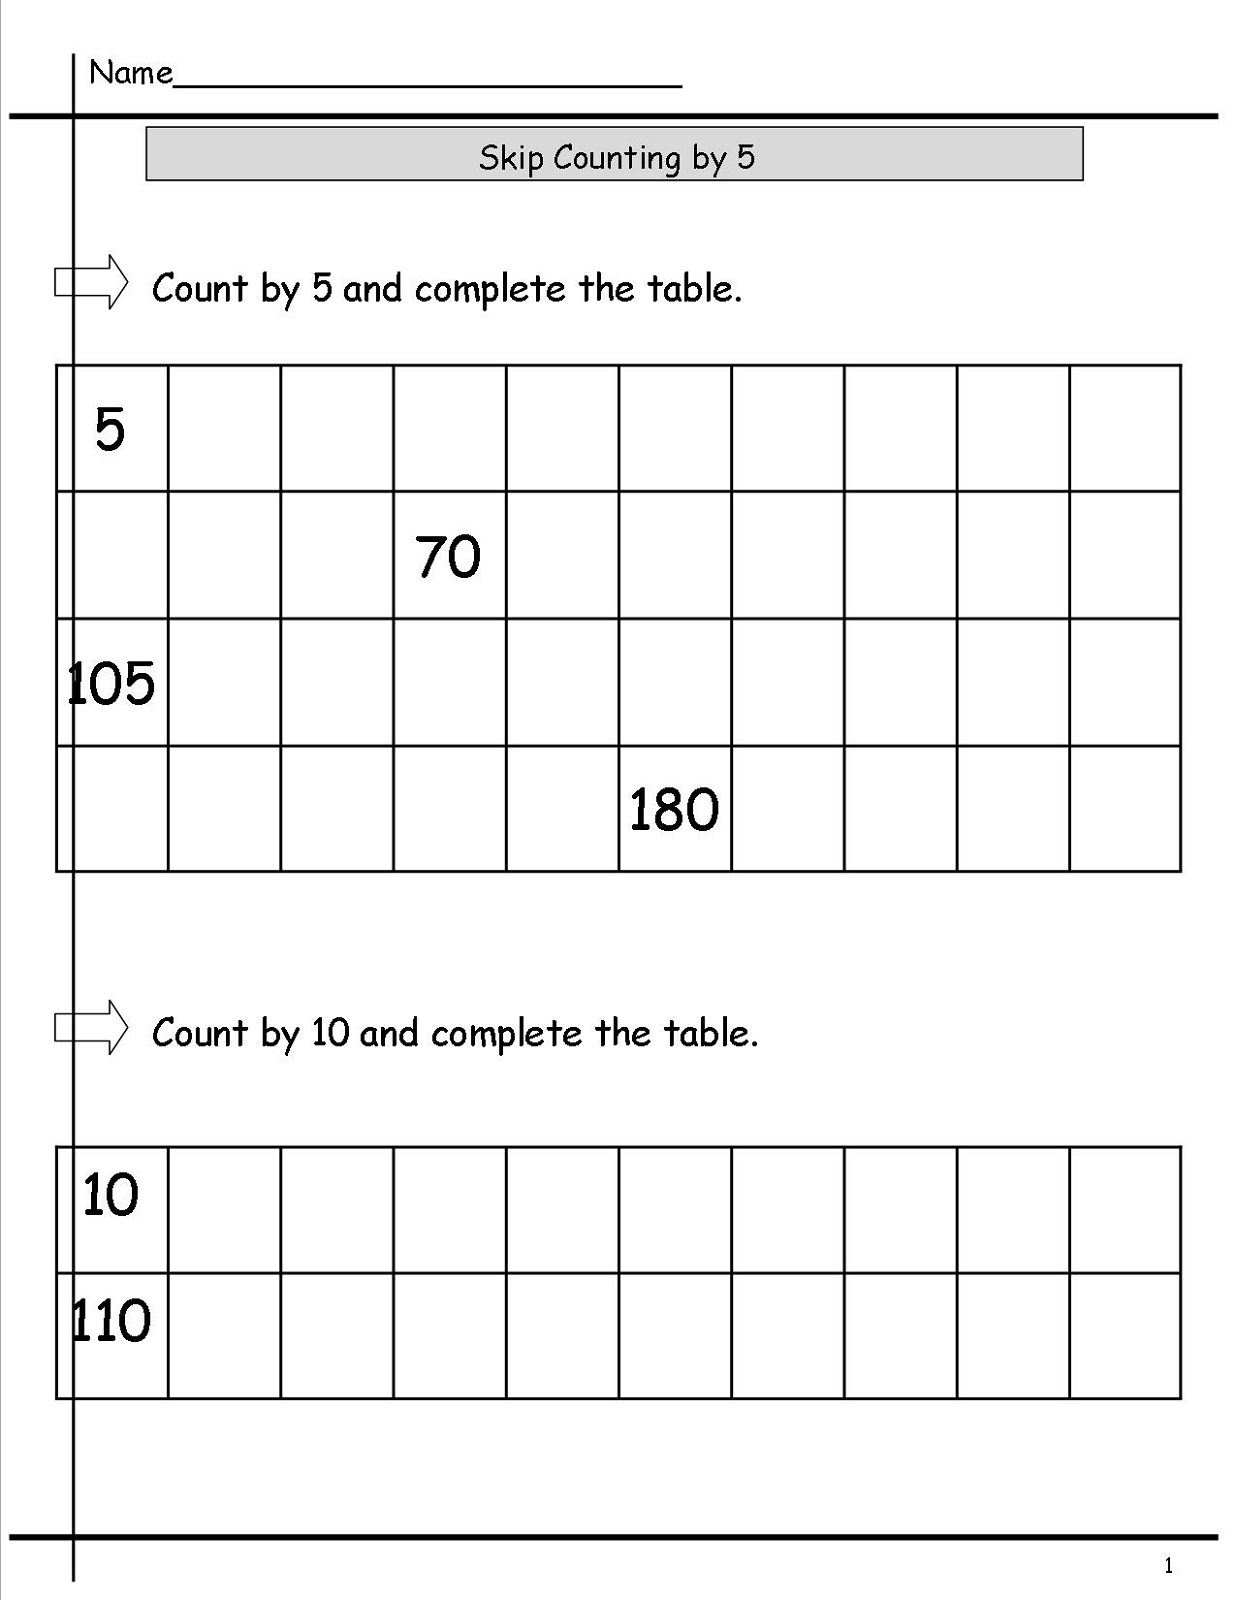 count-by-5s-worksheet-simple